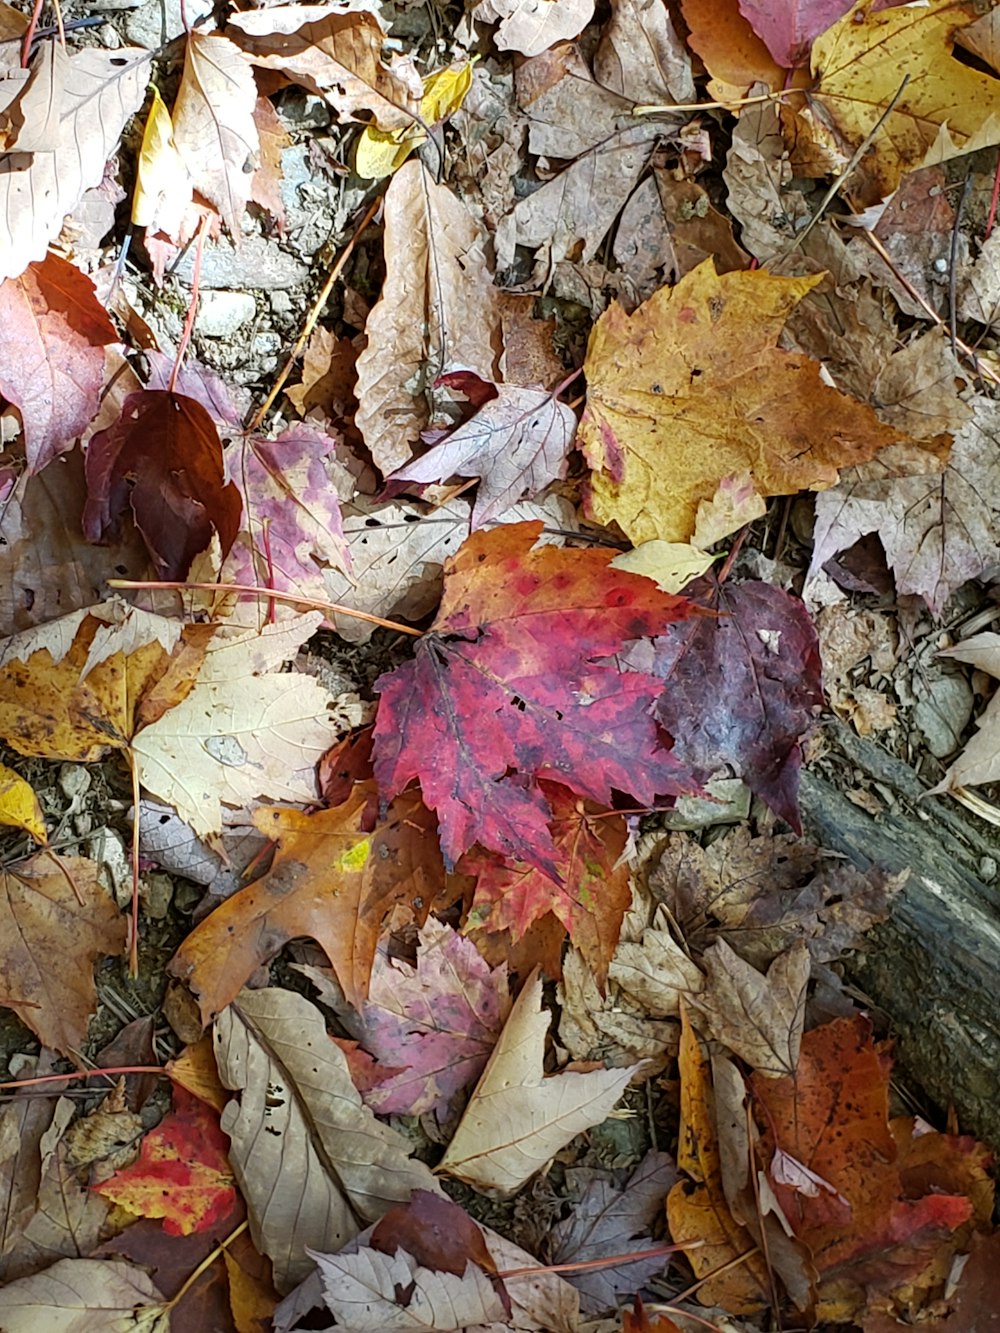 red and brown maple leaves on ground